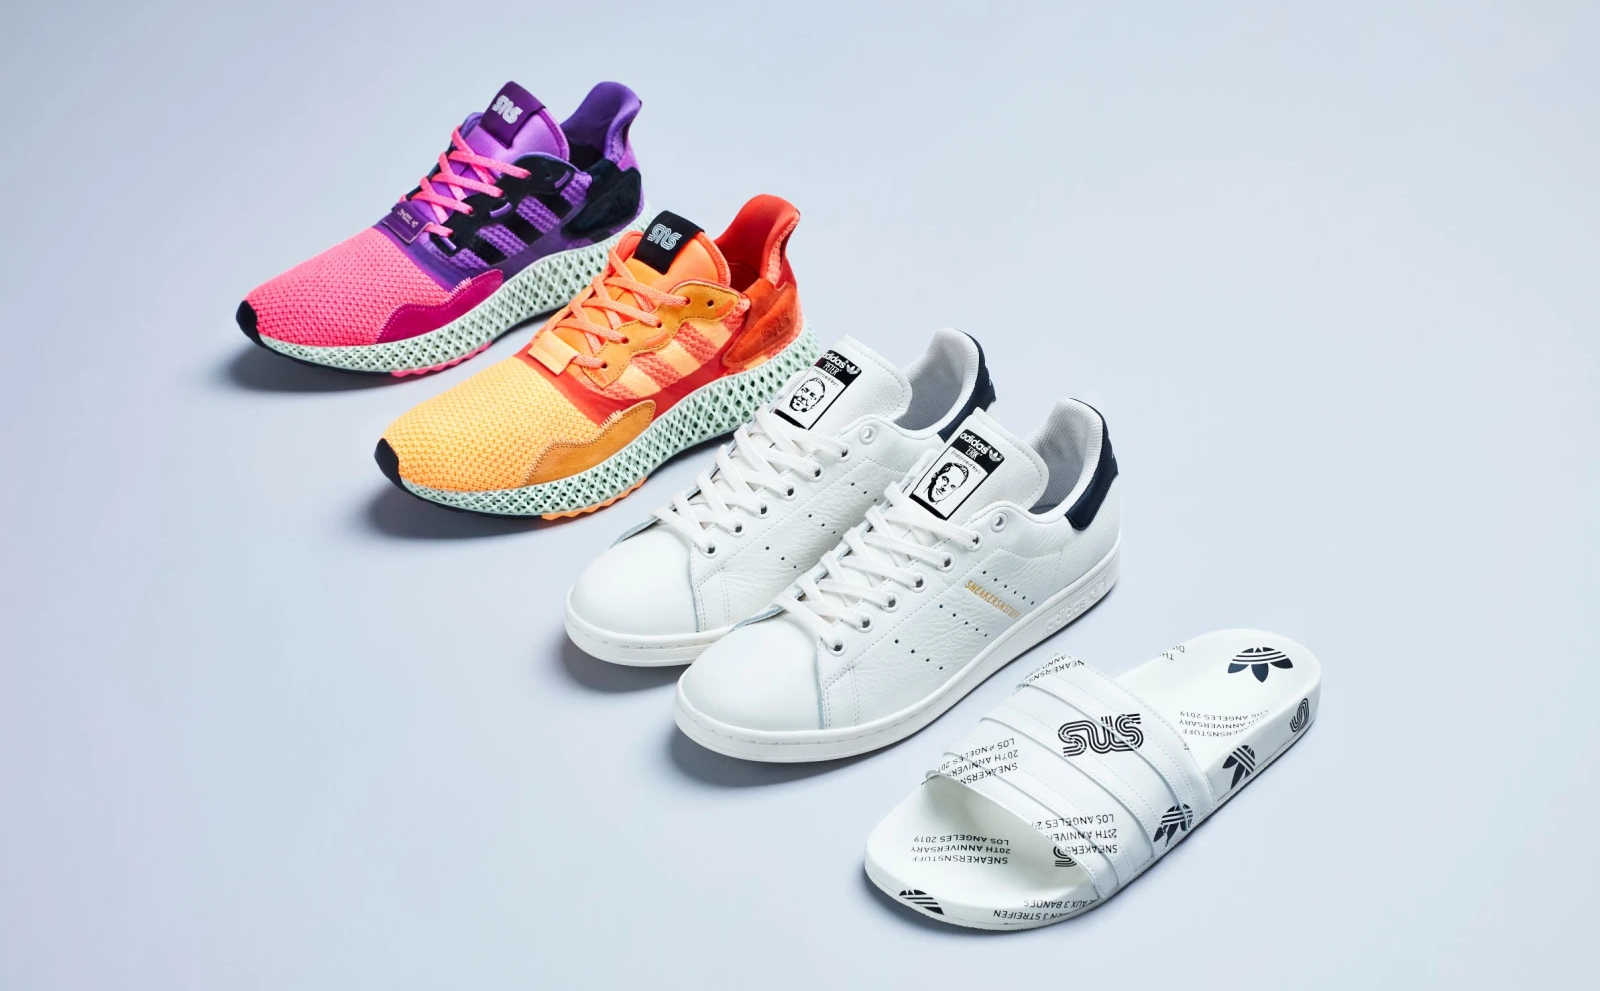 SNS x Adidas Consortium 20th Anniversary Collection